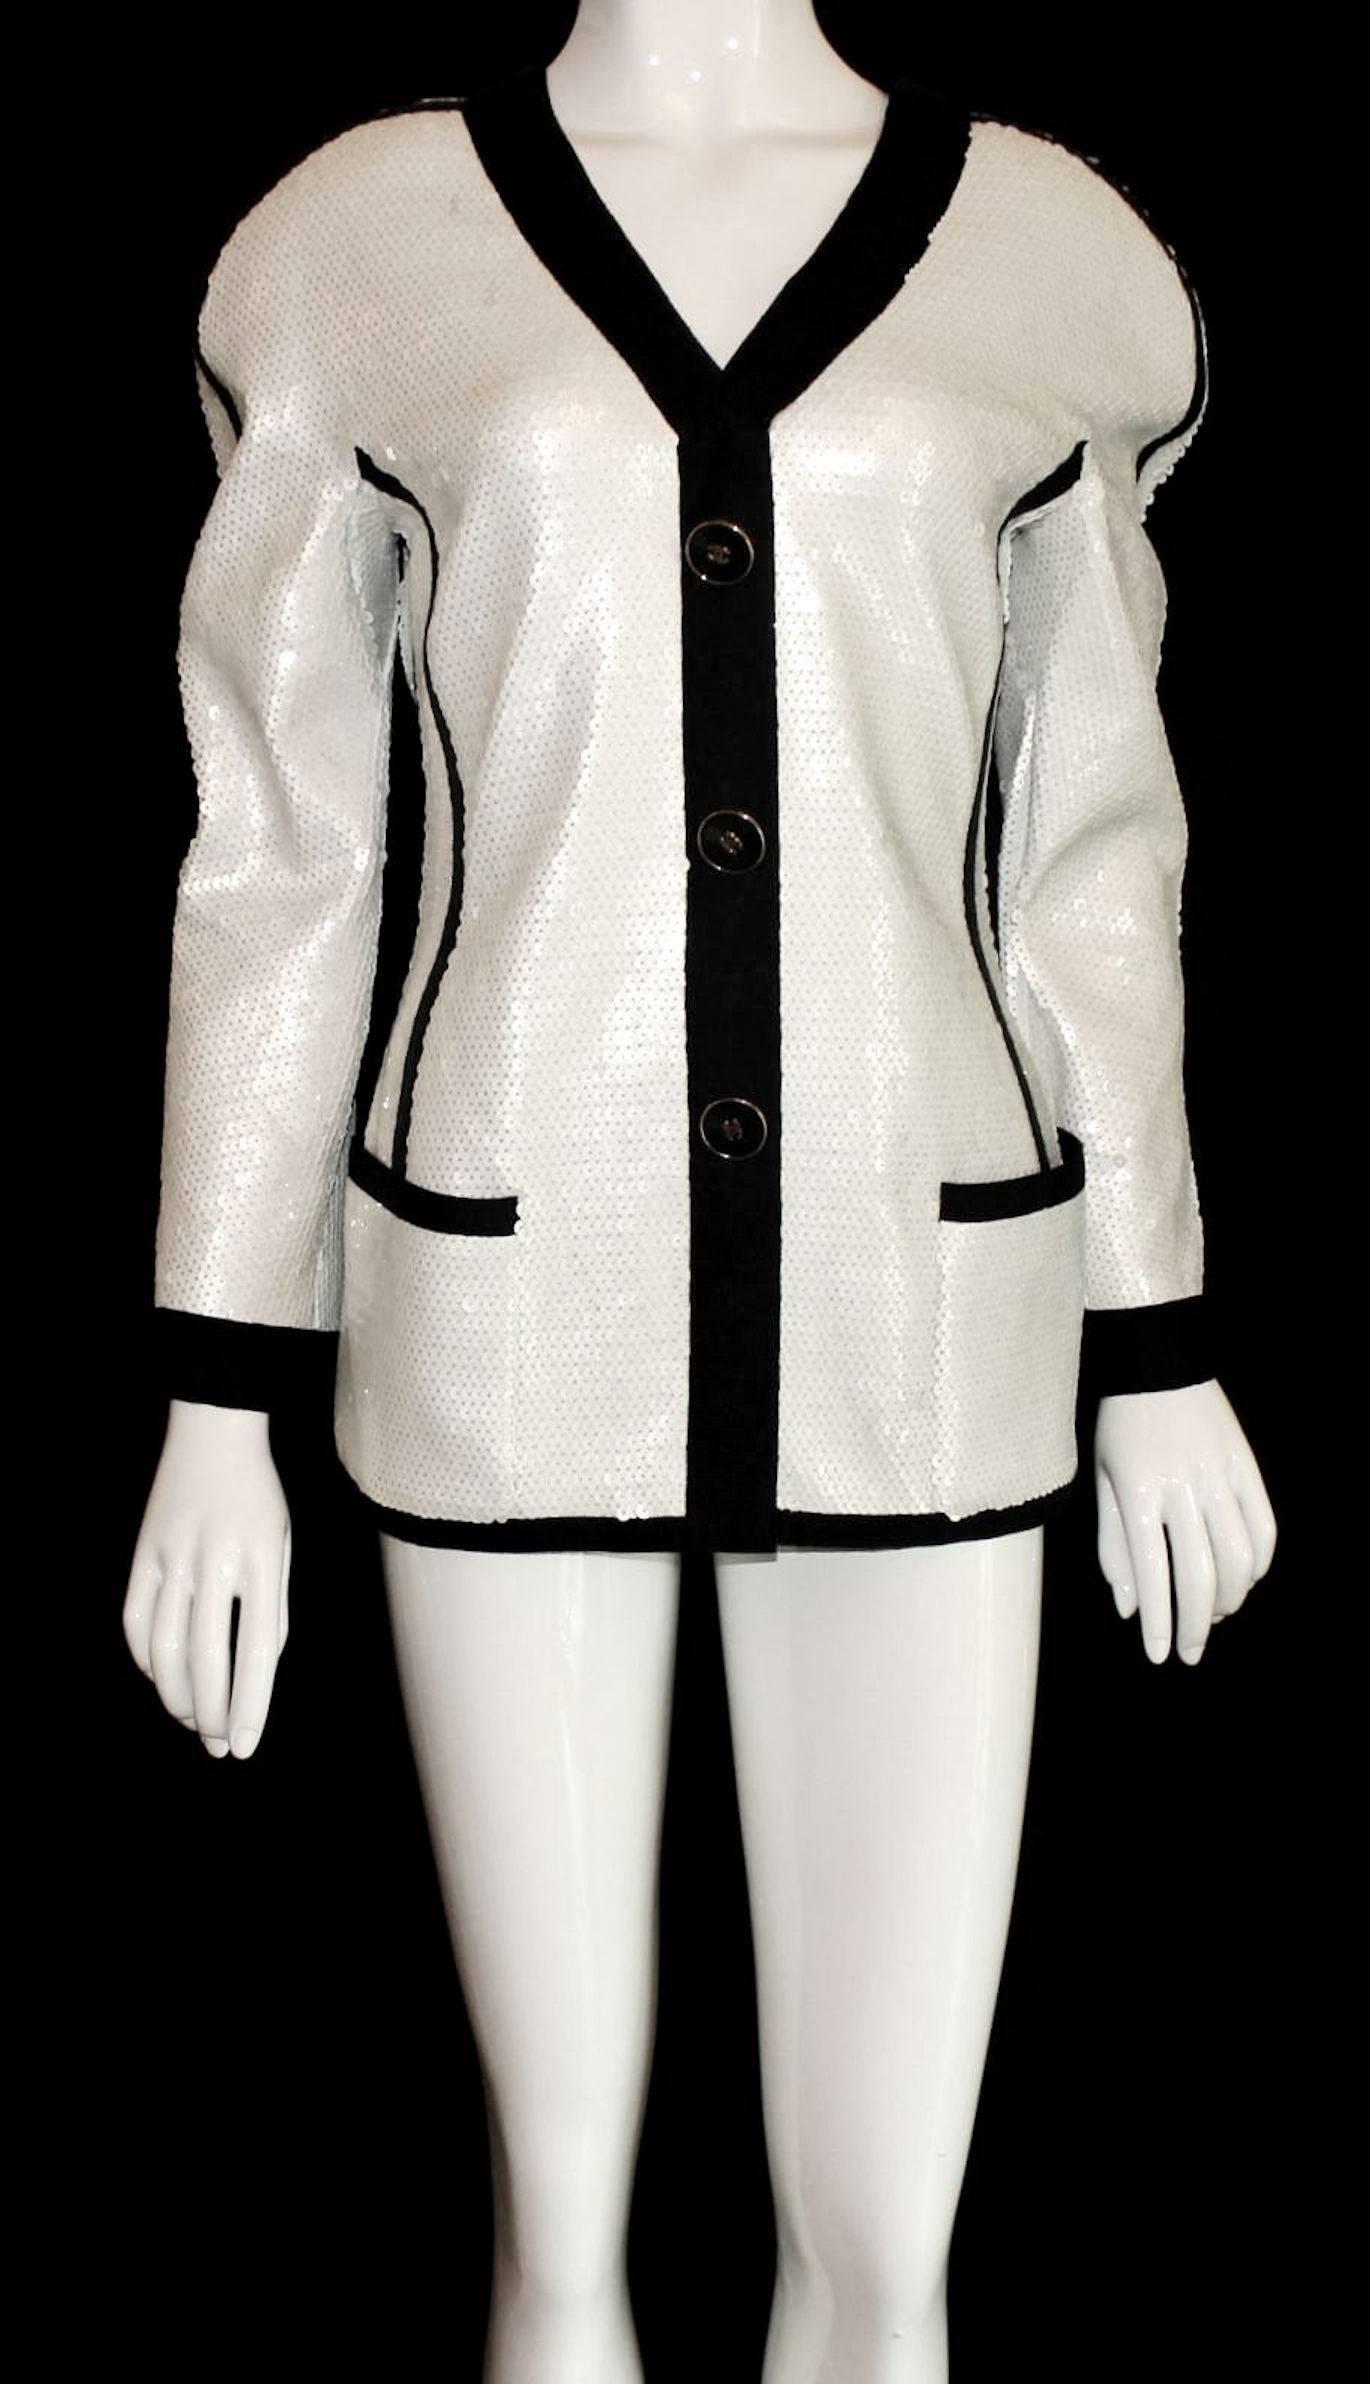 Gray Rare Museum Piece 1990s Chanel Sequin Jacket shown at Met Museum 2005 Exhibition For Sale